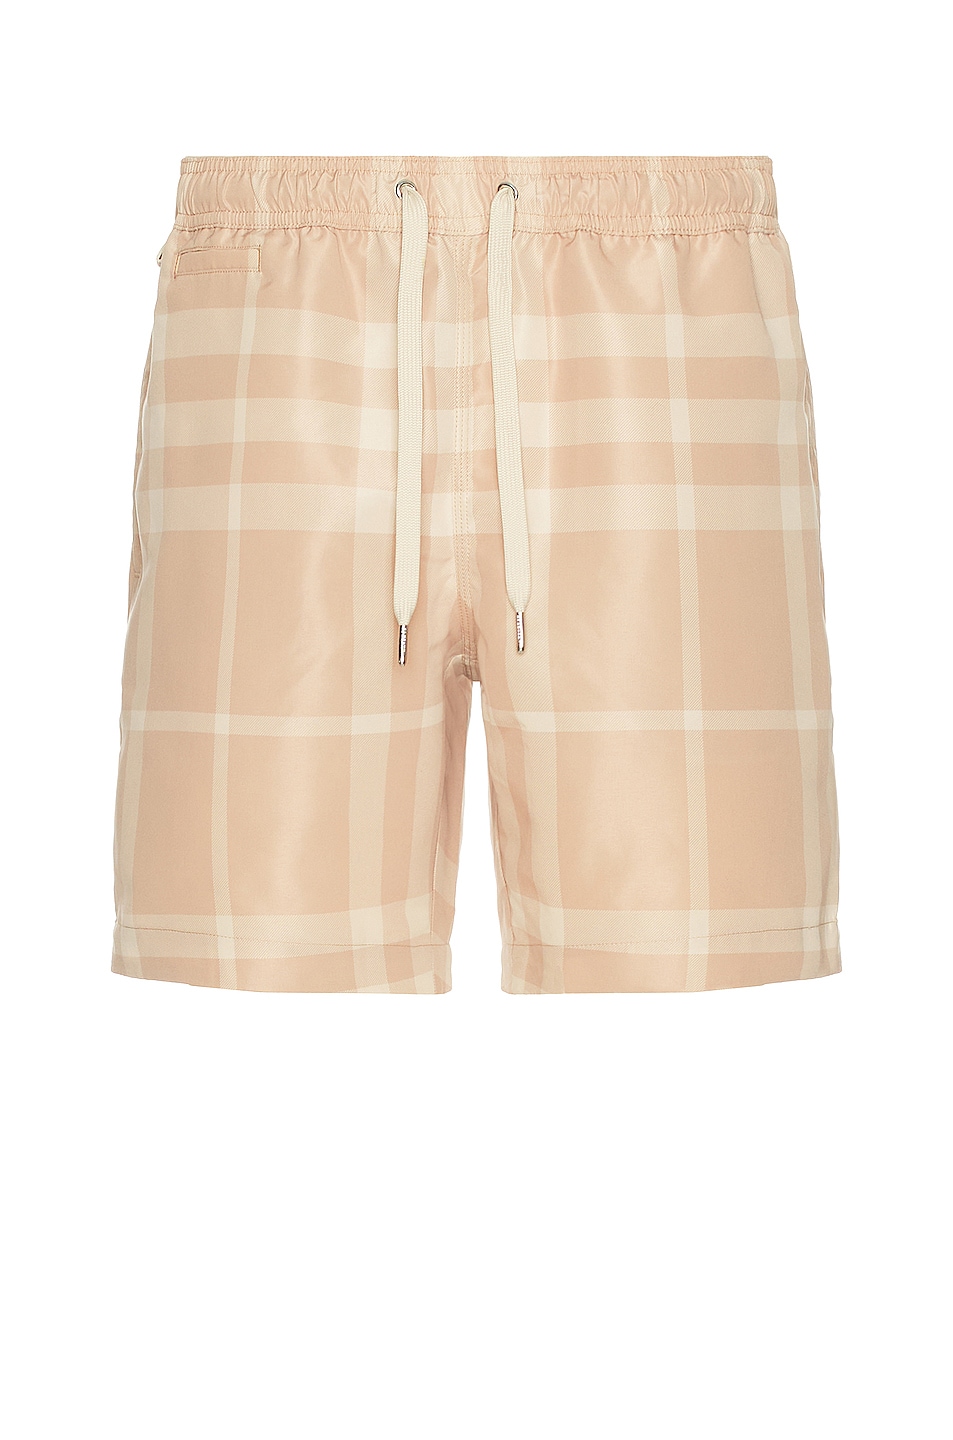 Image 1 of Burberry Martin 3c Check Swim Short in Soft Fawn Ip Check